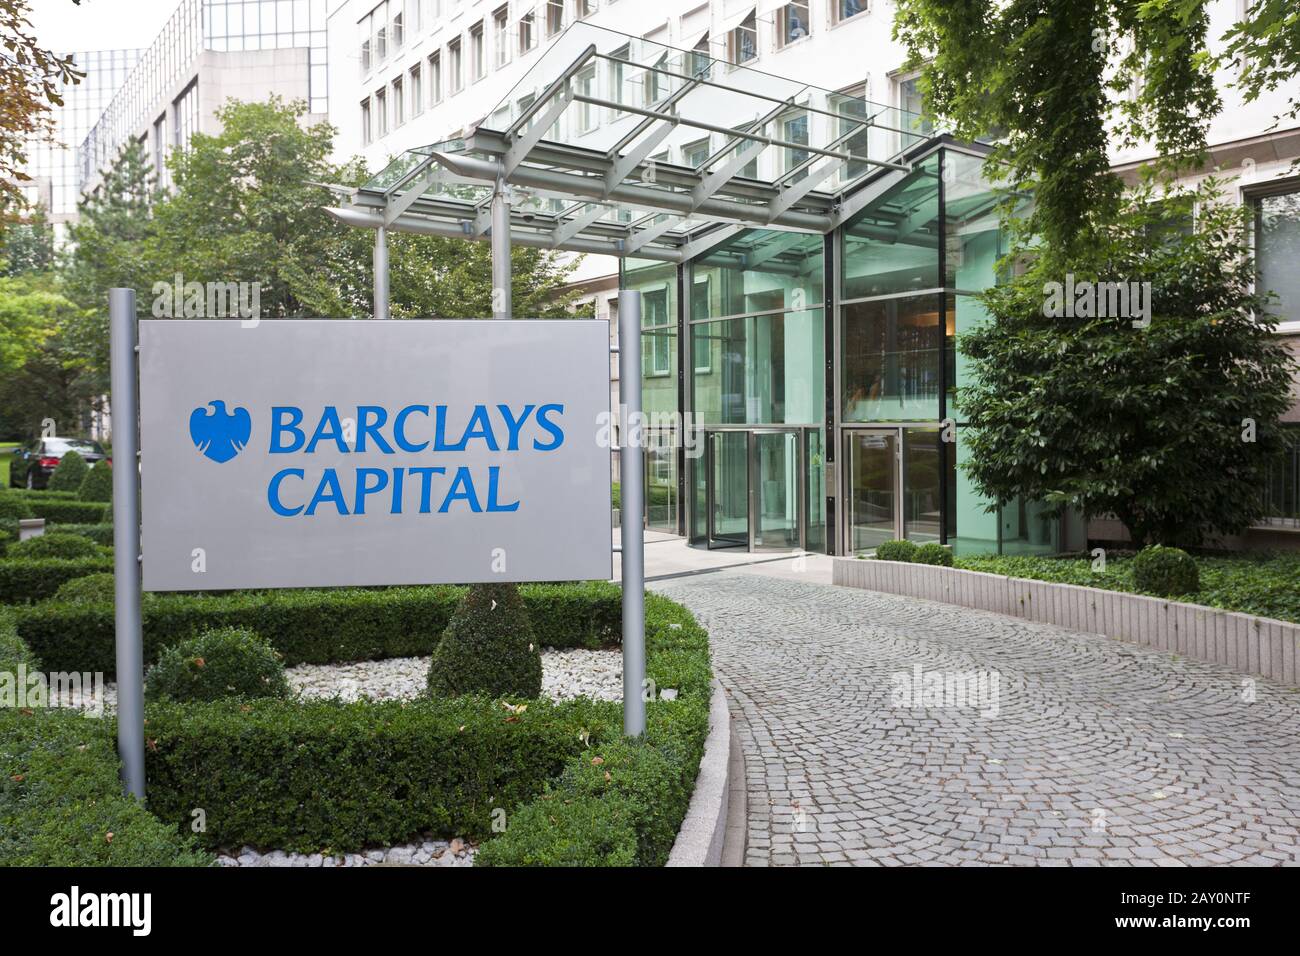 Barclays Capital Bank on Bockenheimer Landstrasse in the Westend district Stock Photo